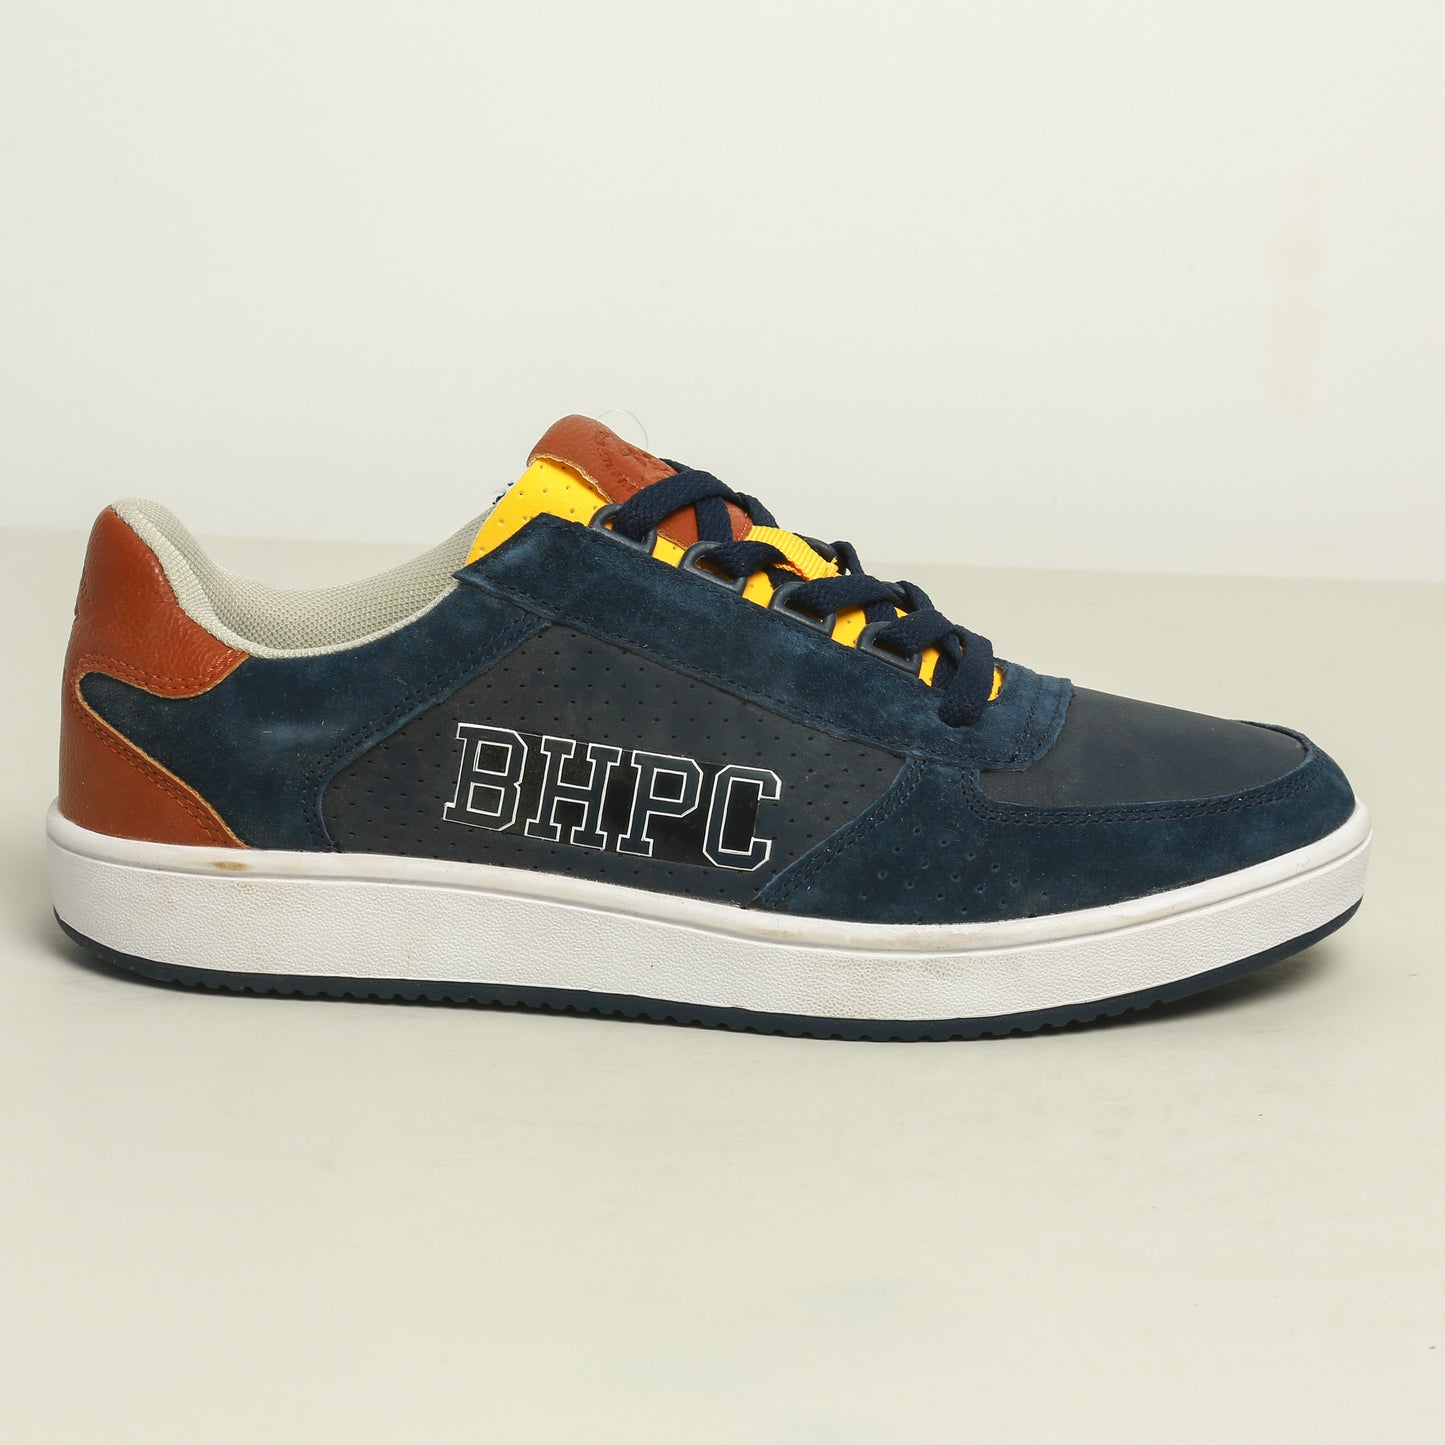 Sneakers Bevely Hills Polo Club - Bleu marine